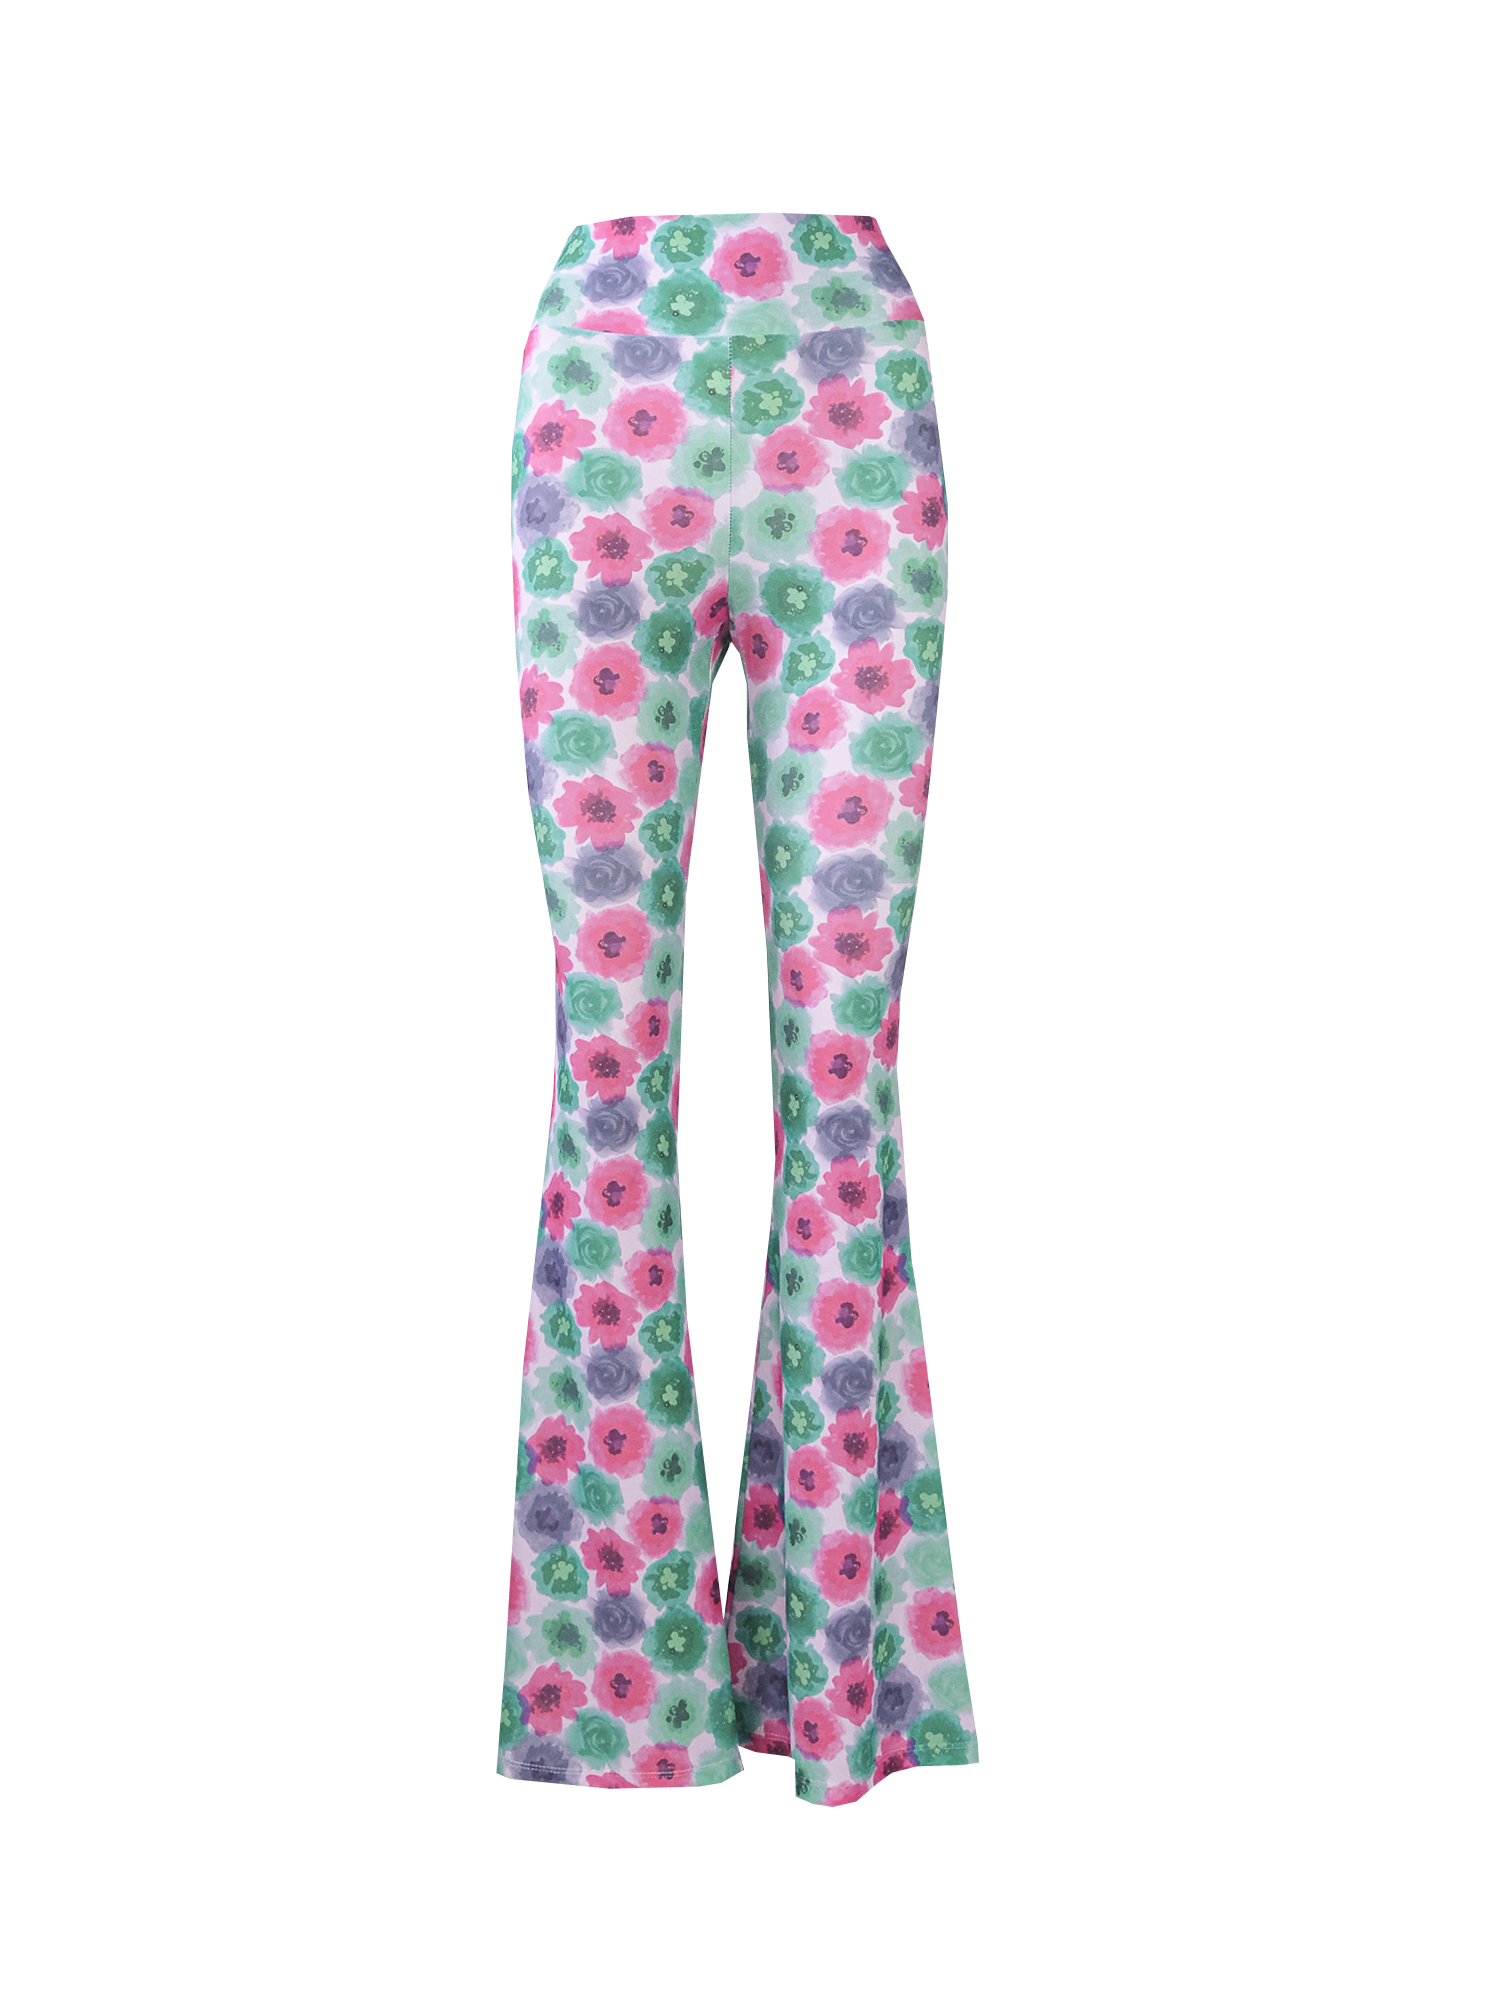 LOLA - flared trouser with high waist in print peonies lycra